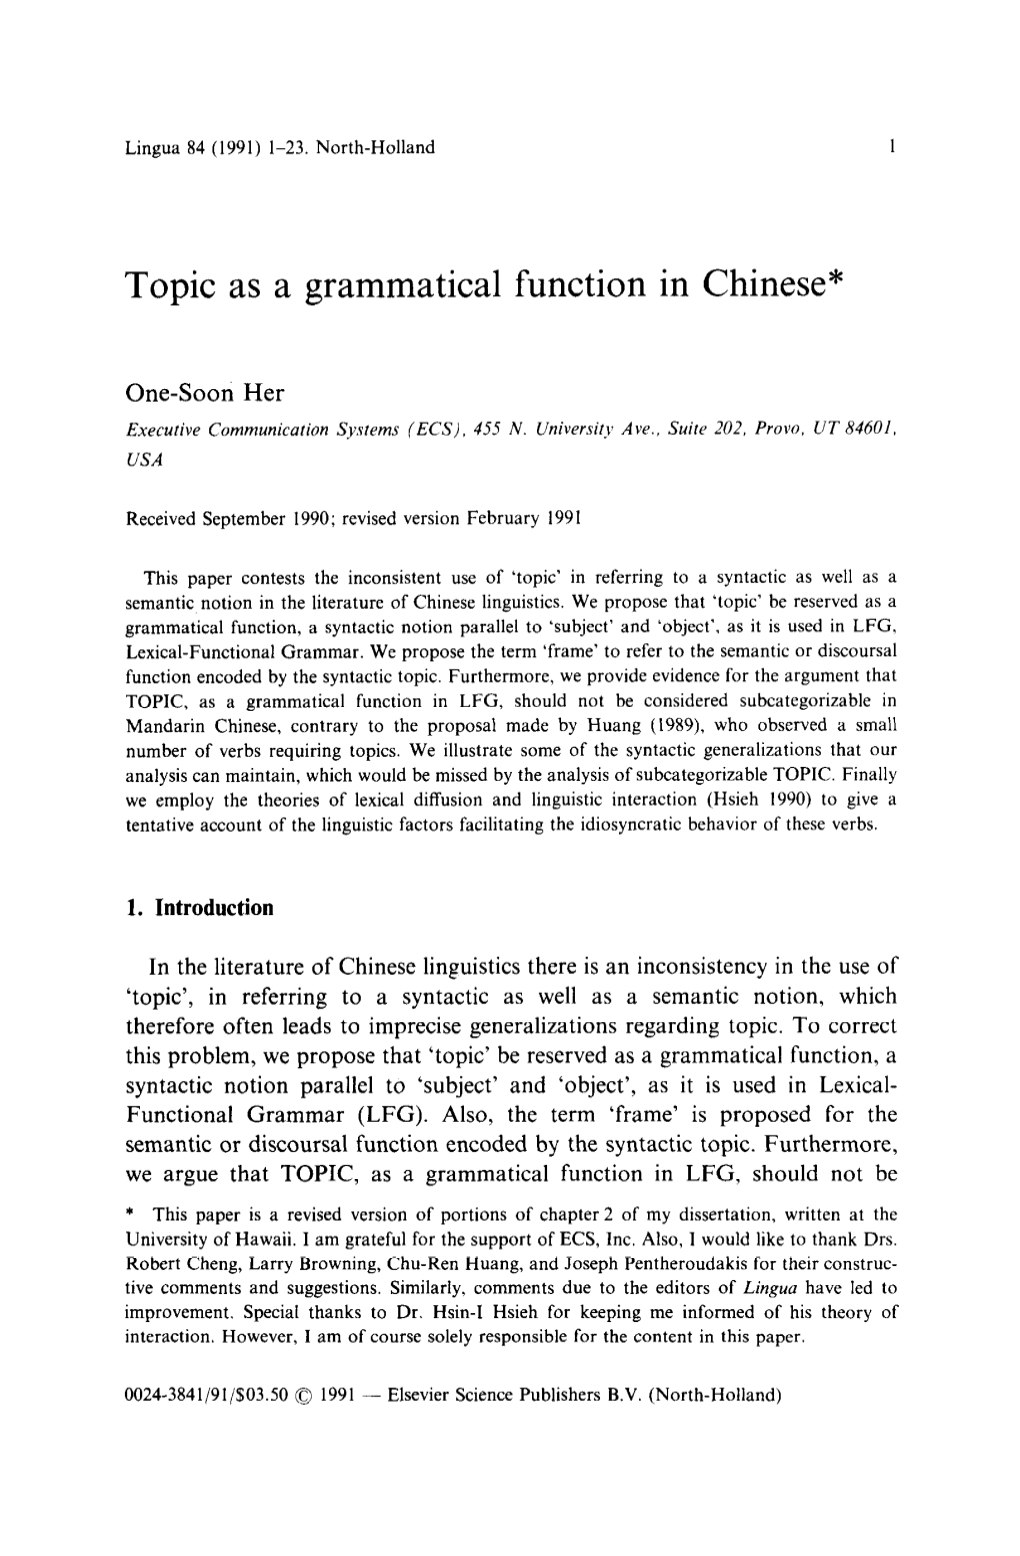 Topic As a Grammatical Function in Chinese*